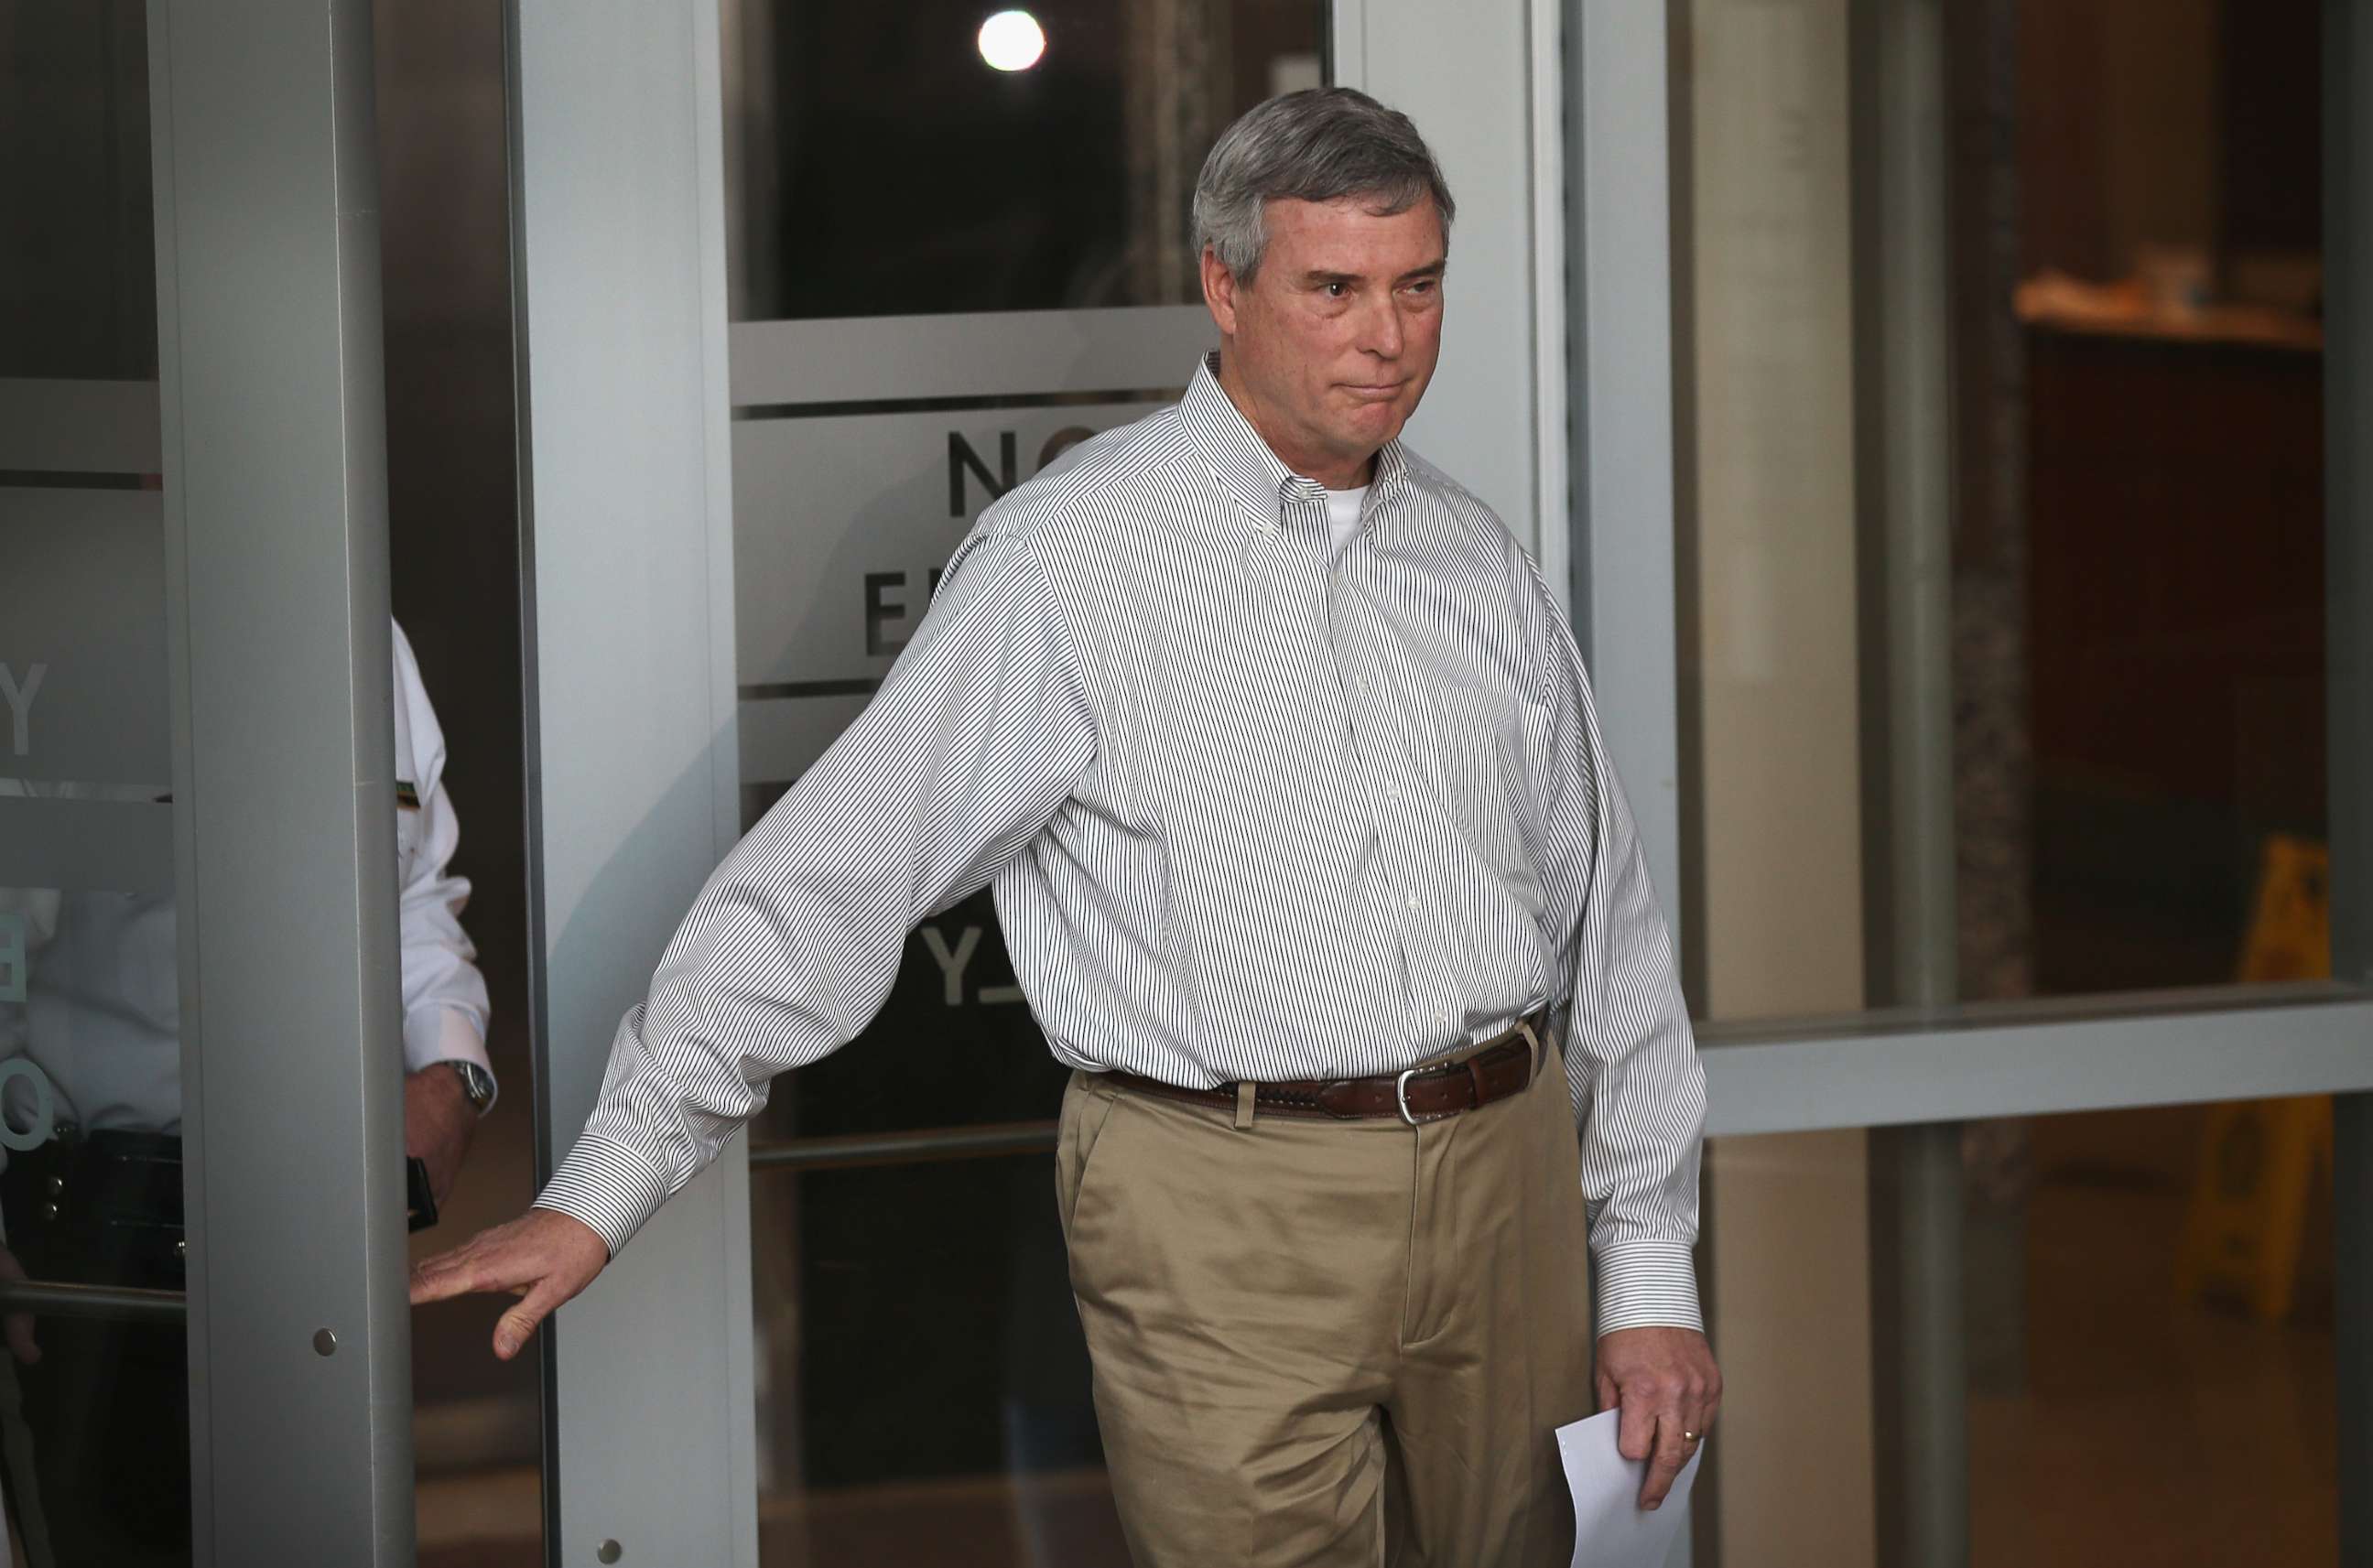 PHOTO: Robert "Bob" McCulloch, the Prosecuting Attorney for St. Louis County, arrives to a press conference on March 15, 2015, in Clayton, Mo.